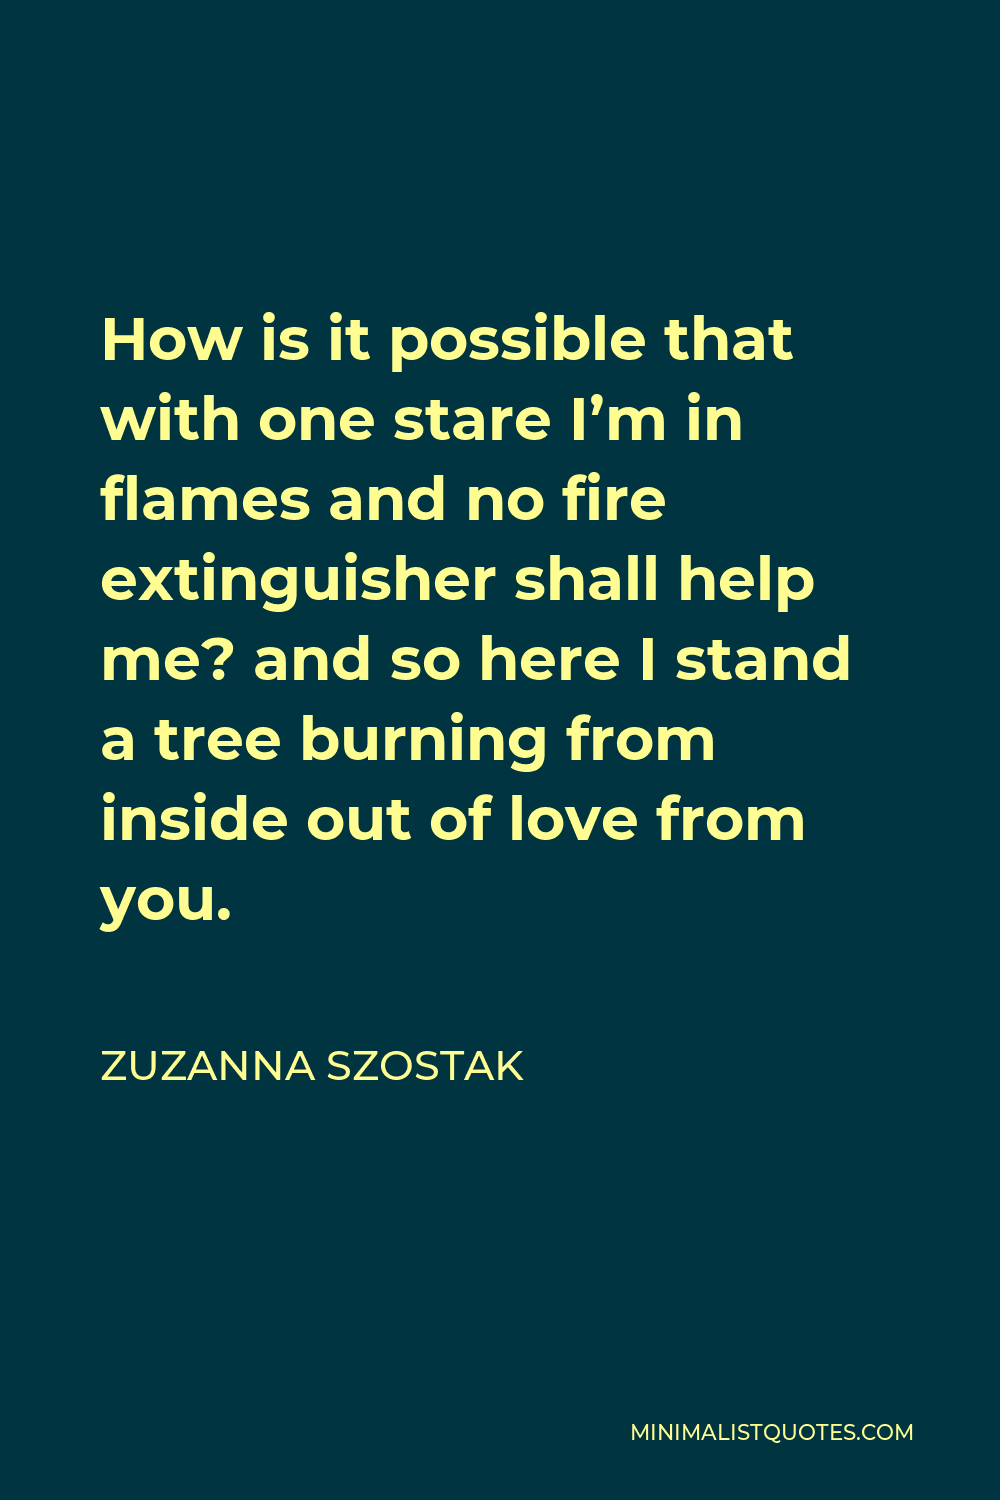 Zuzanna Szostak Quote - How is it possible that with one stare I’m in flames and no fire extinguisher shall help me? and so here I stand a tree burning from inside out of love from you.